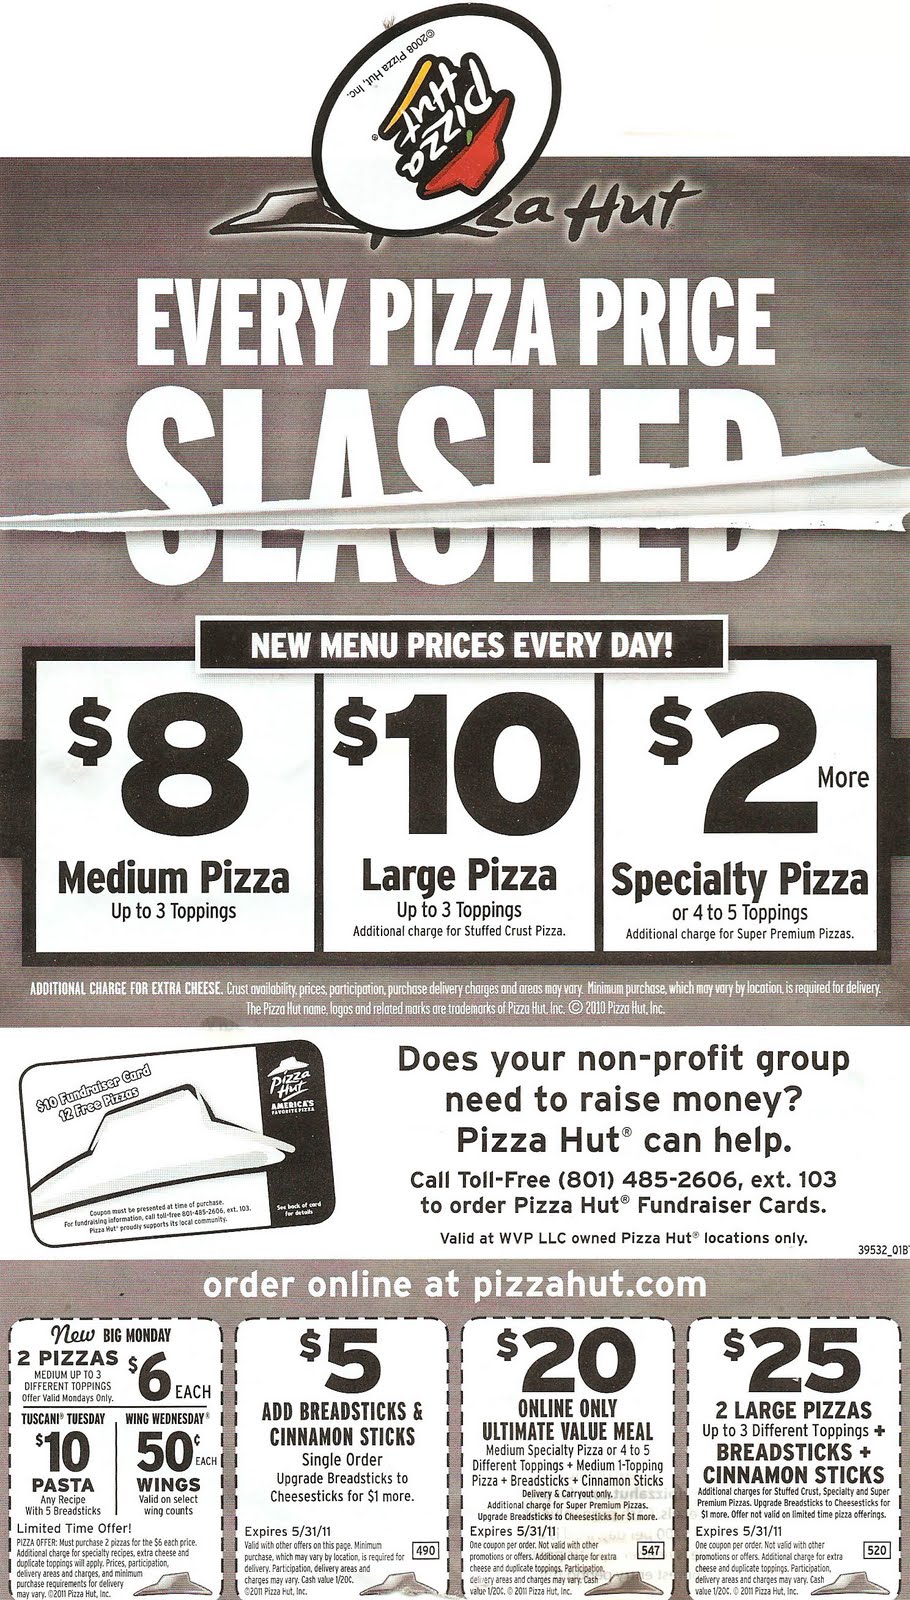 Pizza Hut Coupons 2012 Texas